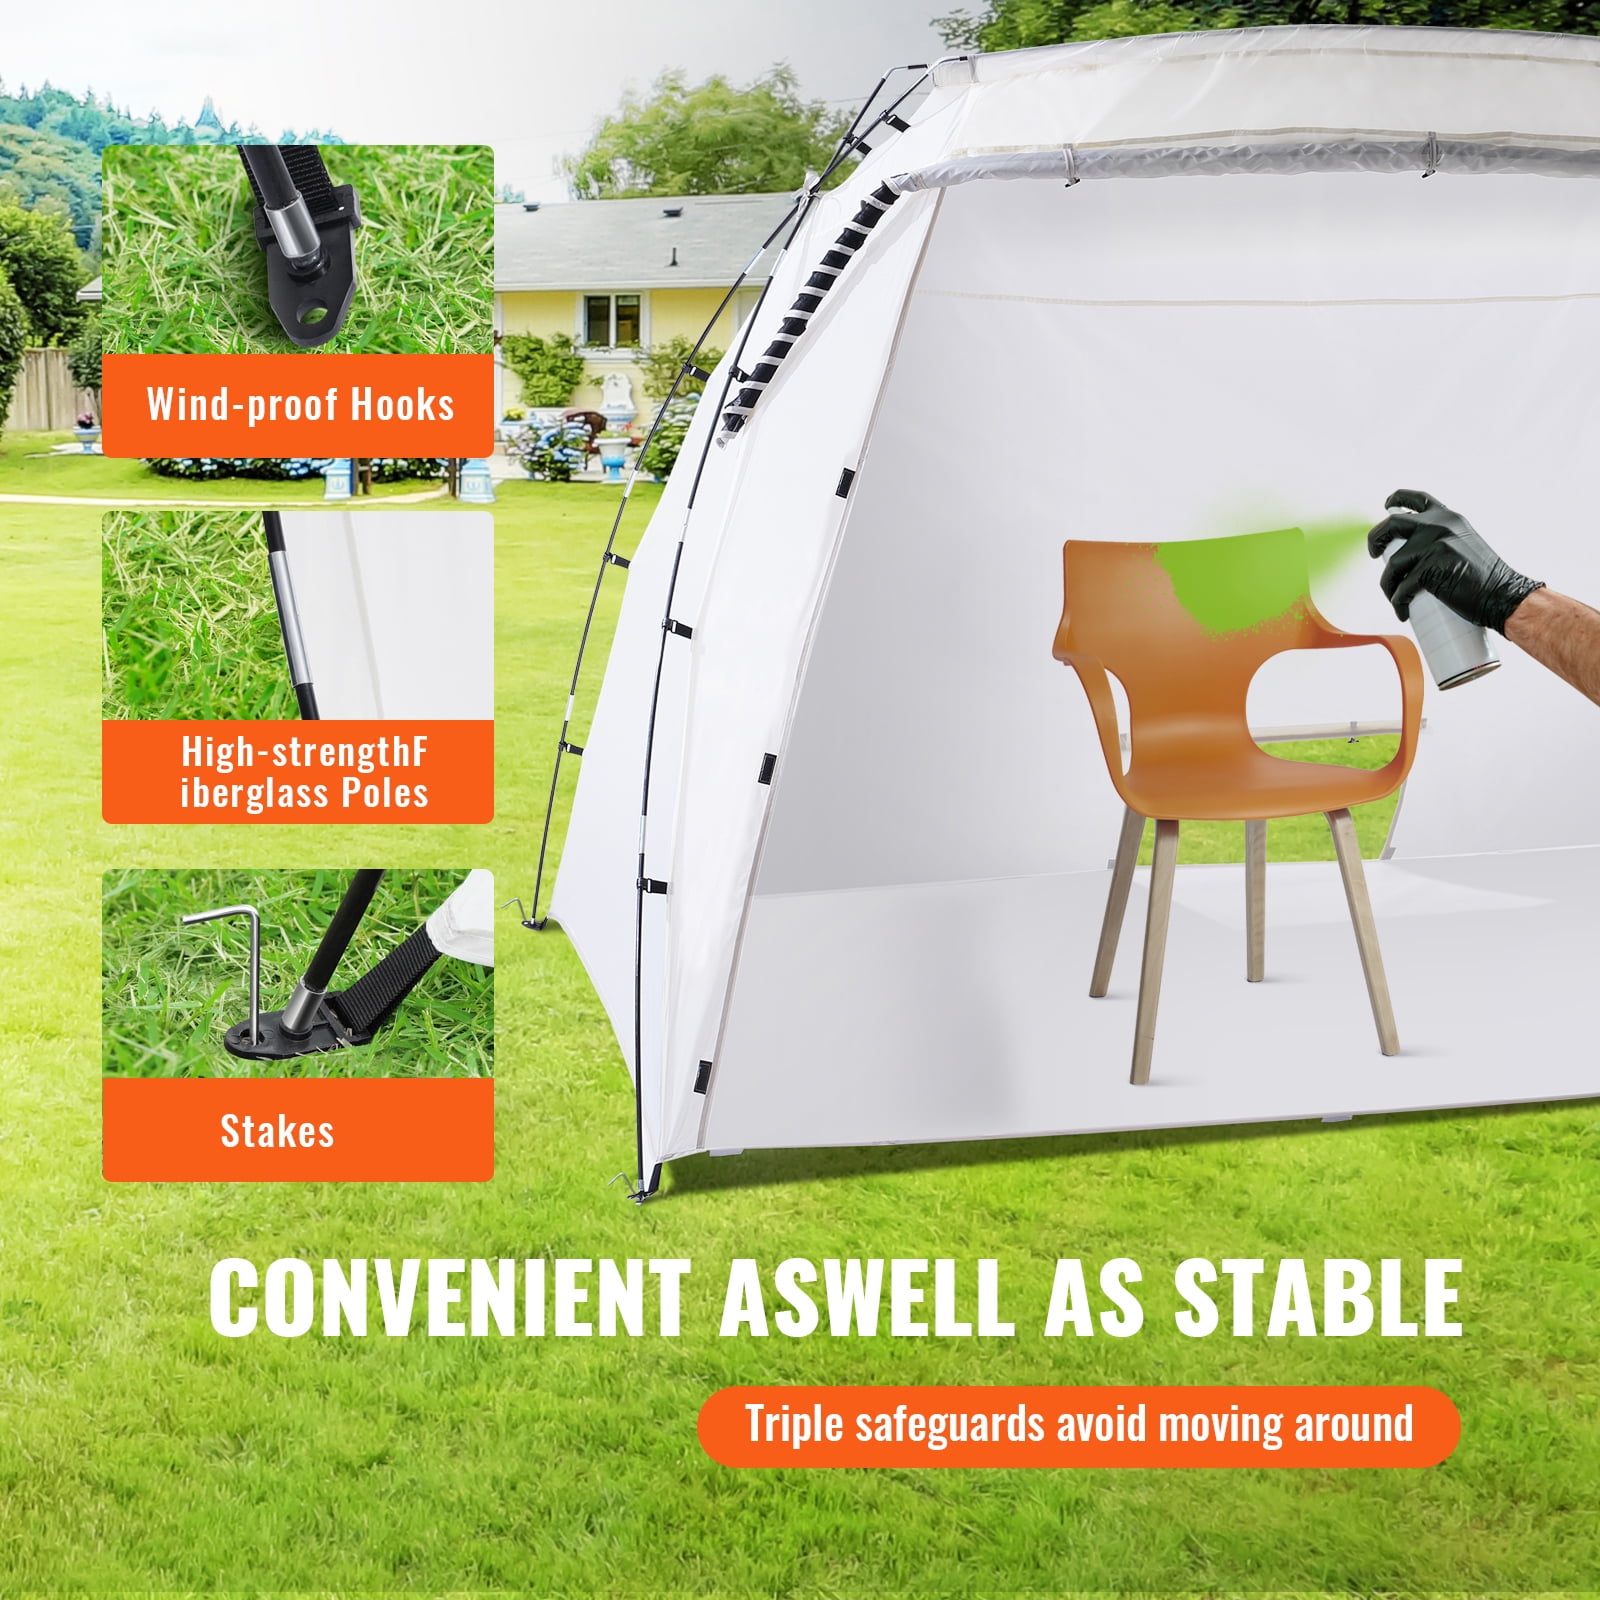 Portable Spray Paint Booth Tent: PLANTIONAL Spray Shelter with Waterproof  Floor, Mesh Screen & Rear Vent, Hobby Paint Shield Tool Painting Station